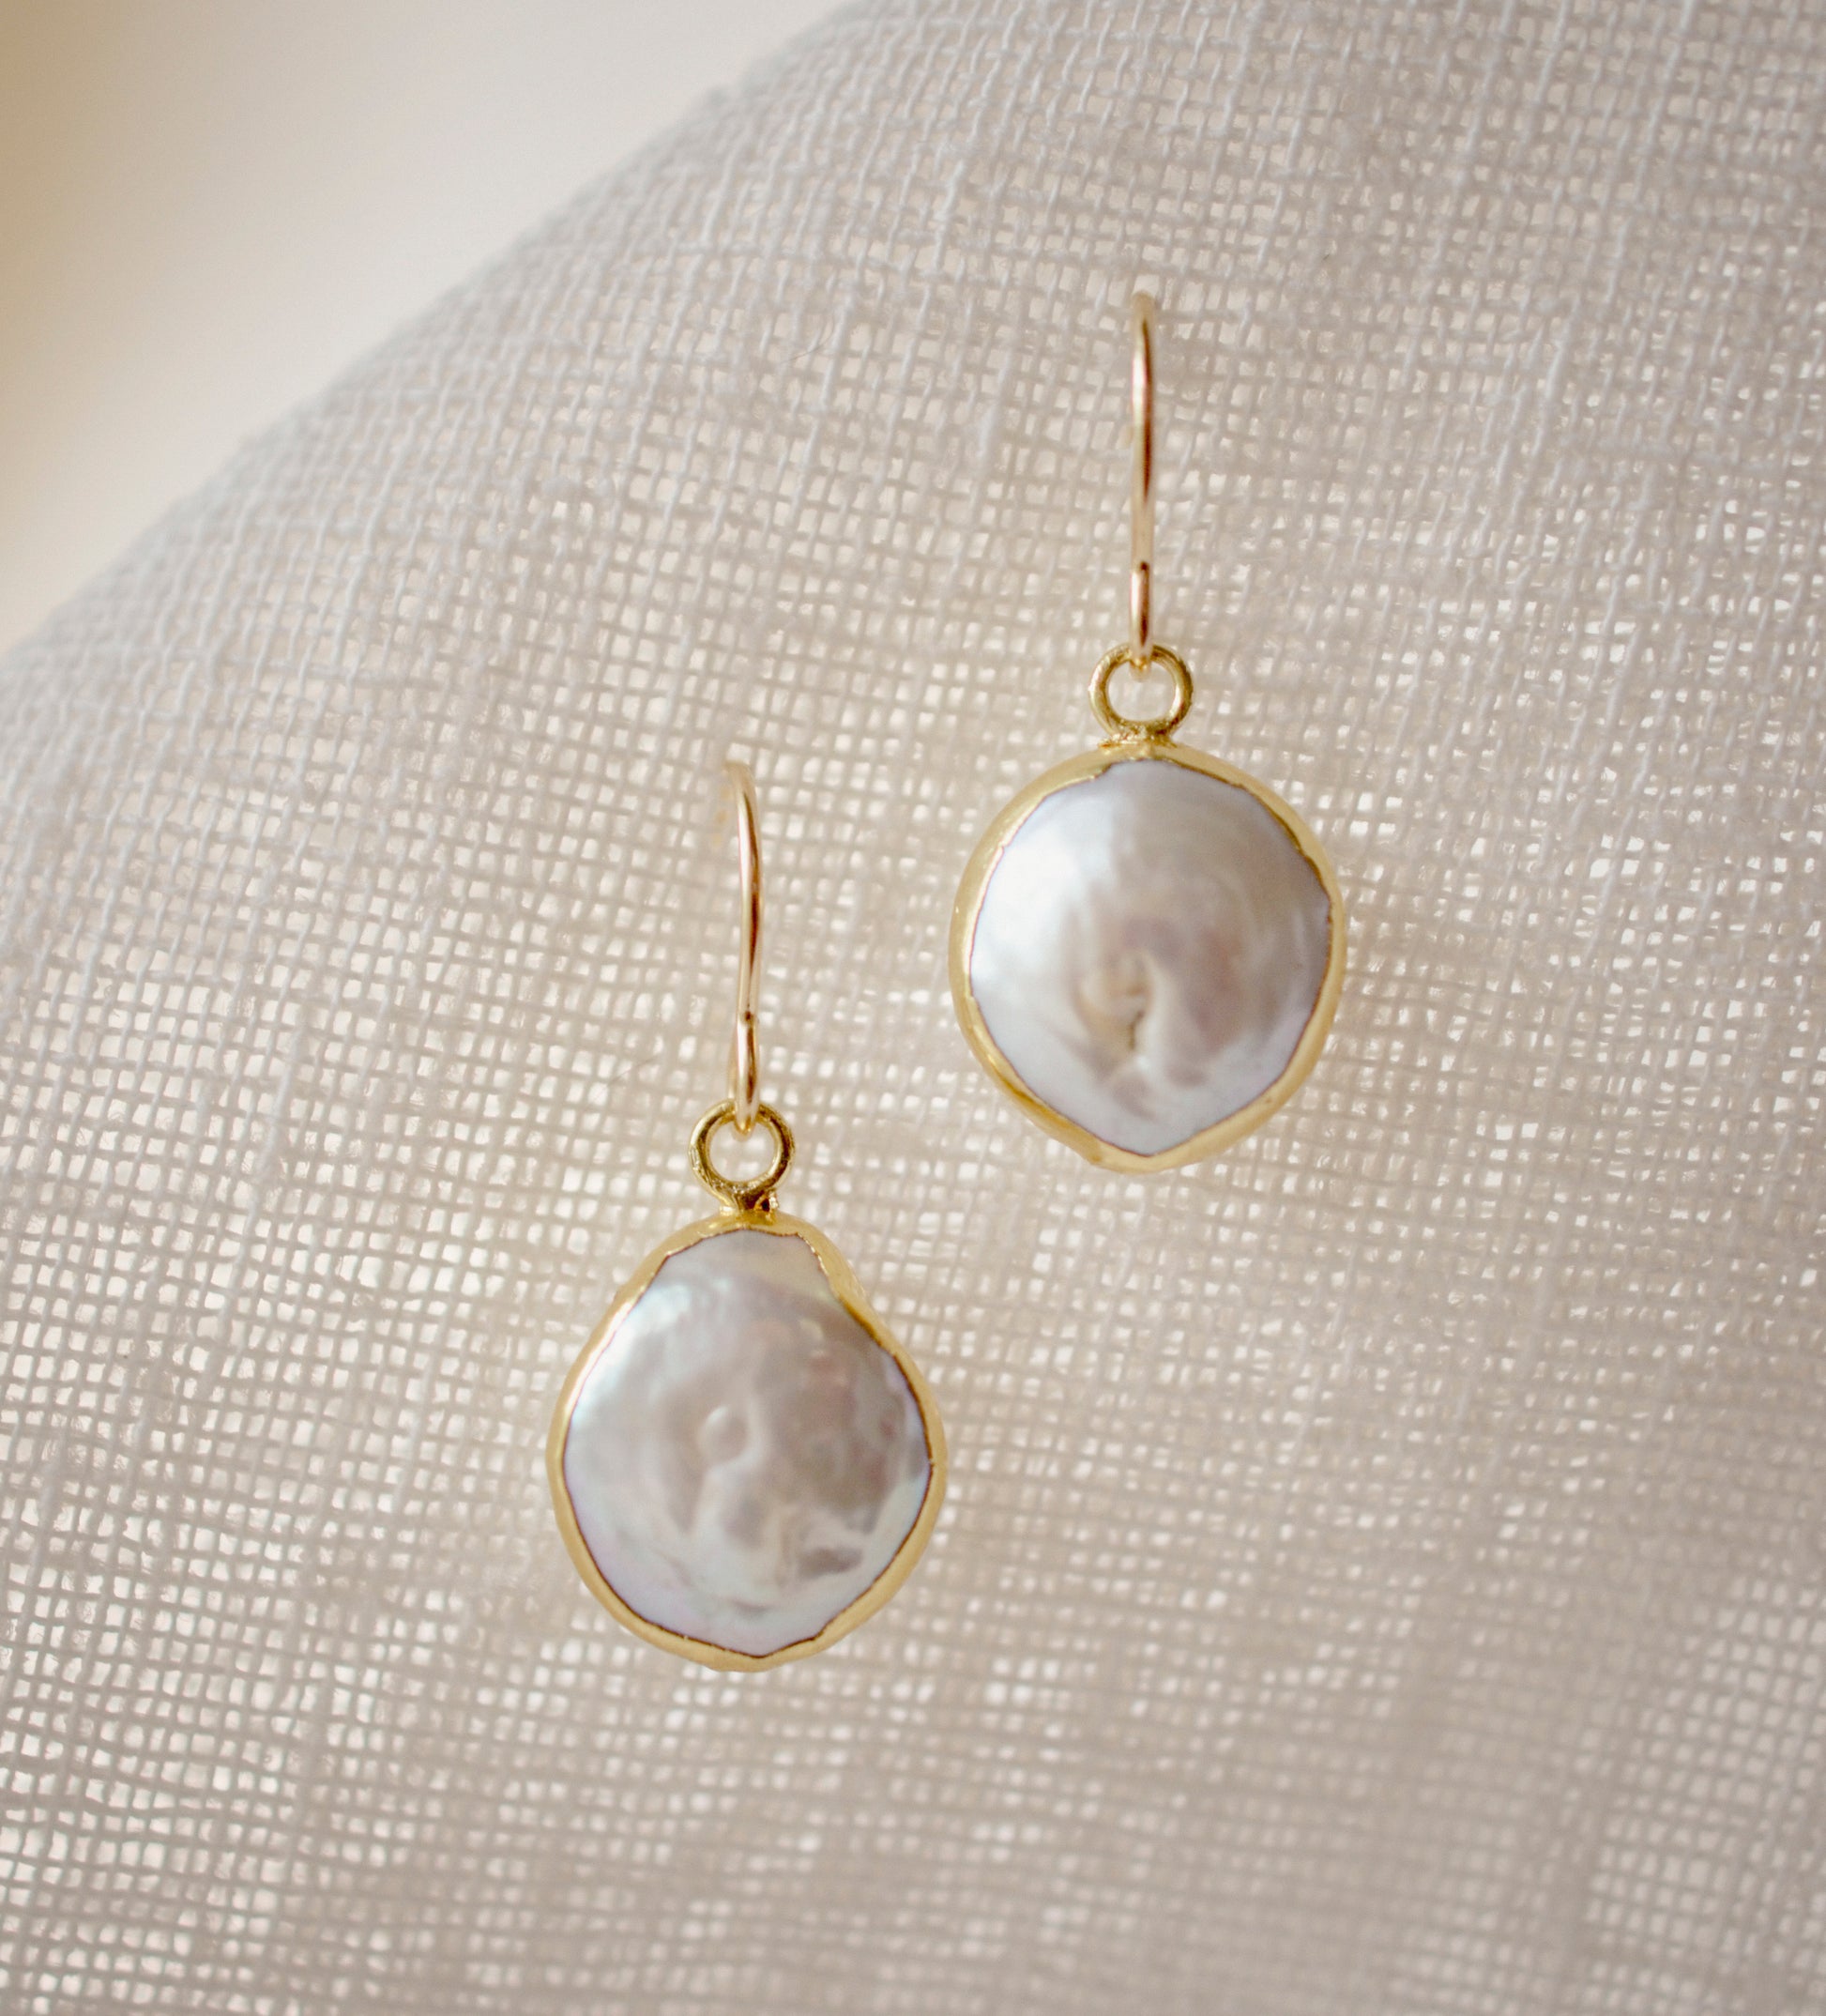 Natural white freshwater pearl dangle earring. The pearl is set in 22k gold electroplate and suspended from 14k gold filled earwires. 